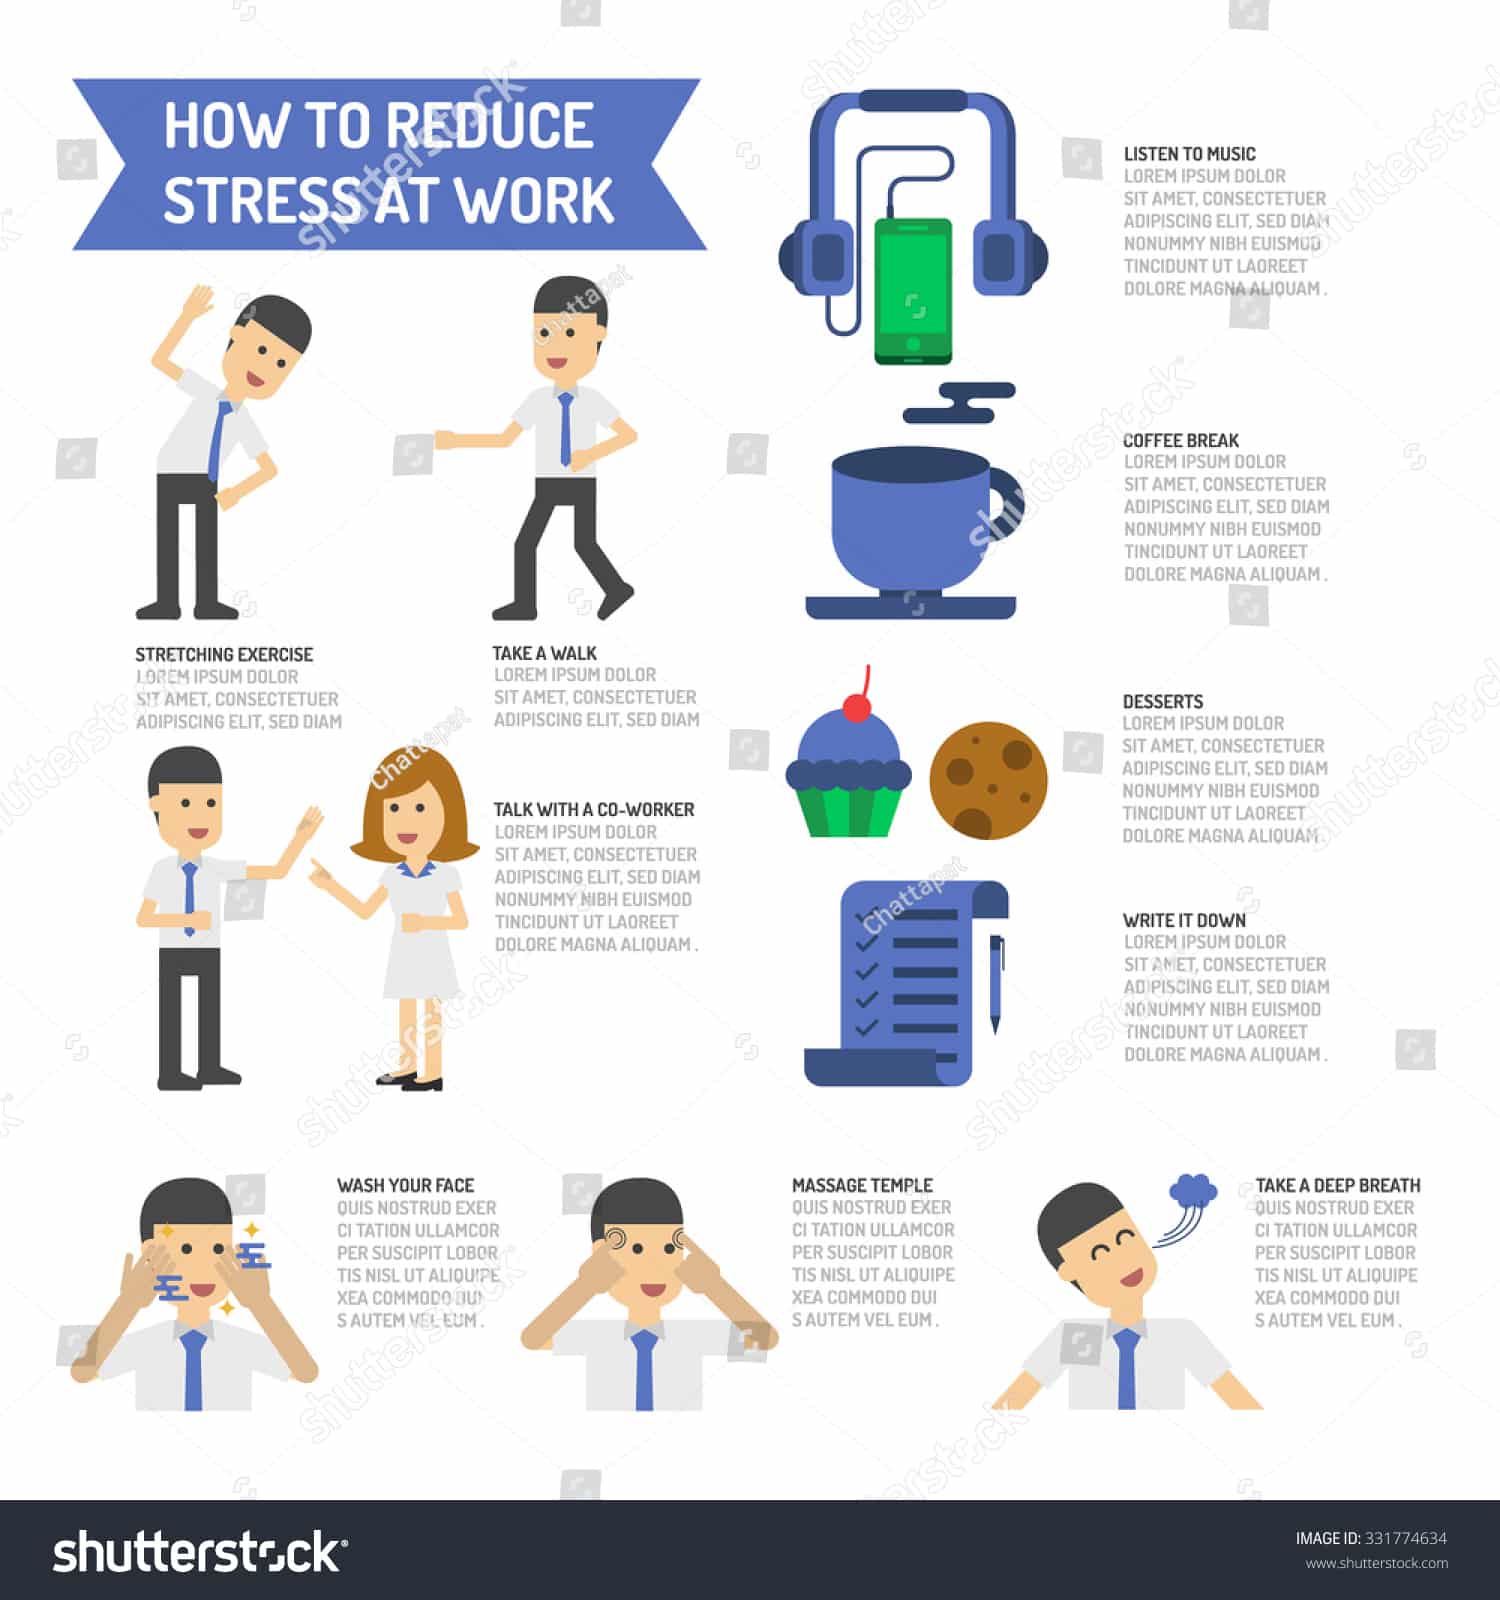 How To Reduce Stress At Work. Stock Vector Illustration 331774634 ...